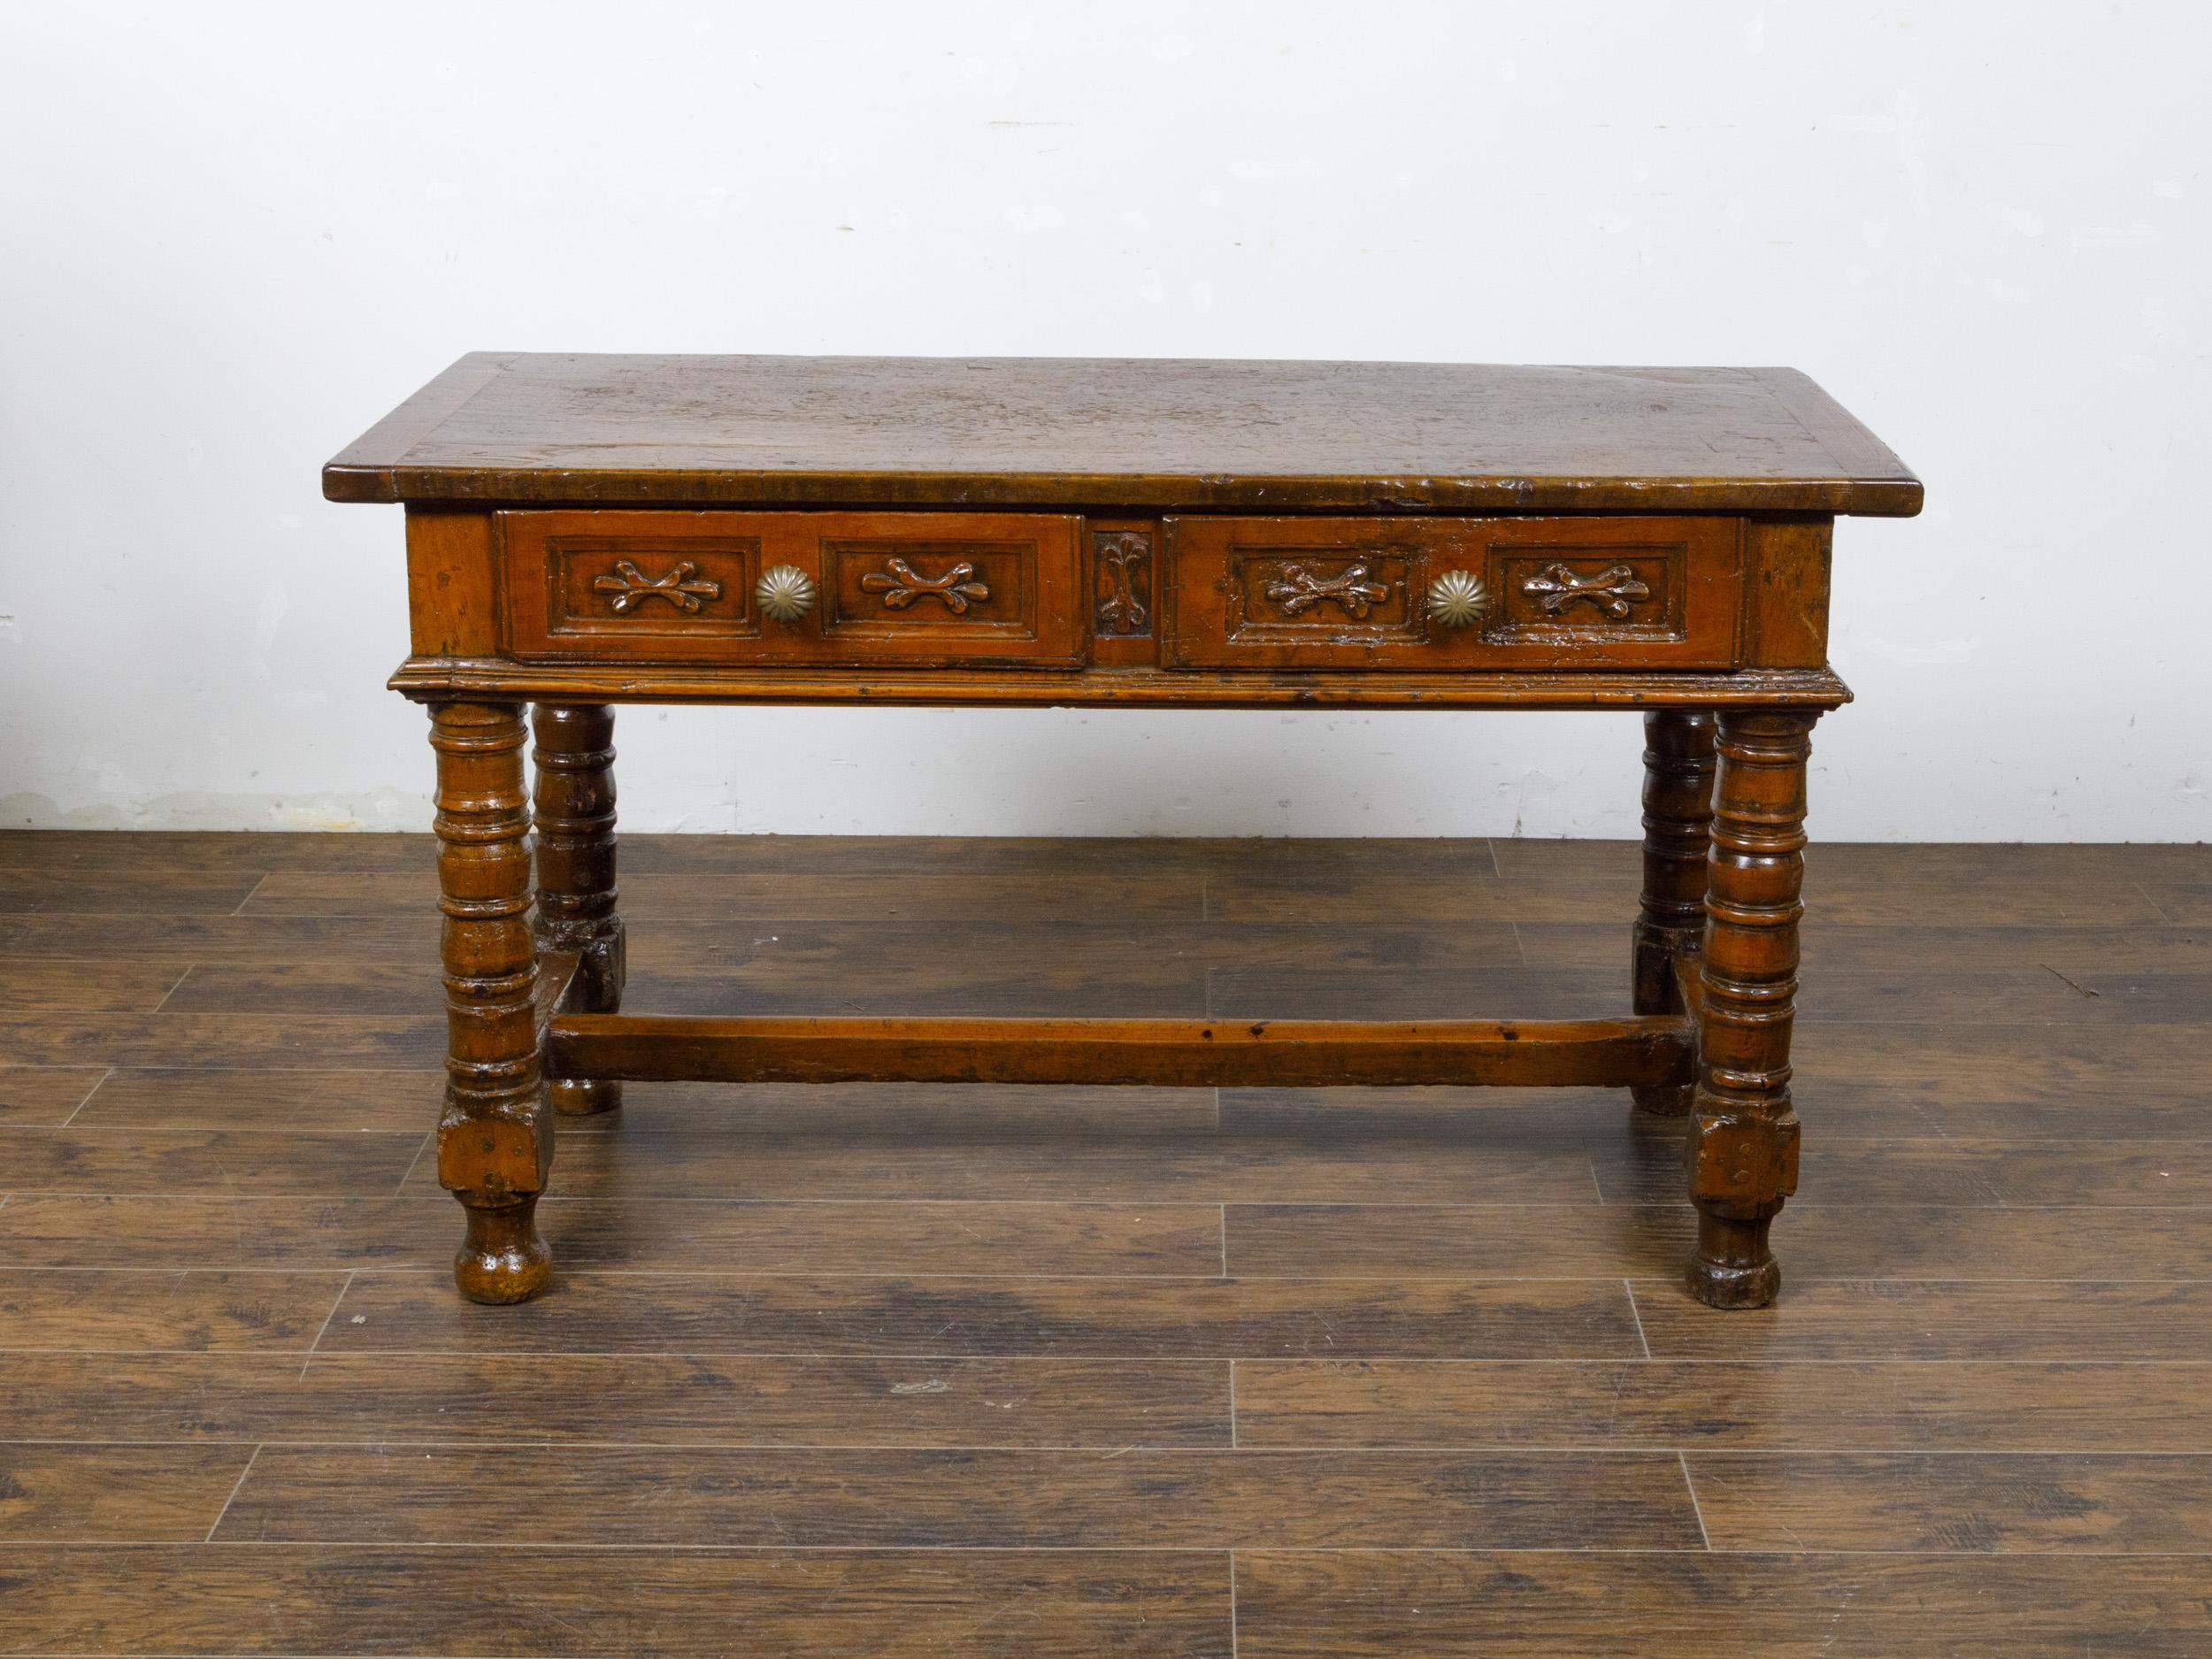 A Spanish walnut console table from the 18th century with two carved drawers, turned baluster legs and H-Form cross stretcher. This 18th-century Spanish walnut console table marries historical charm with exquisite craftsmanship. The table features